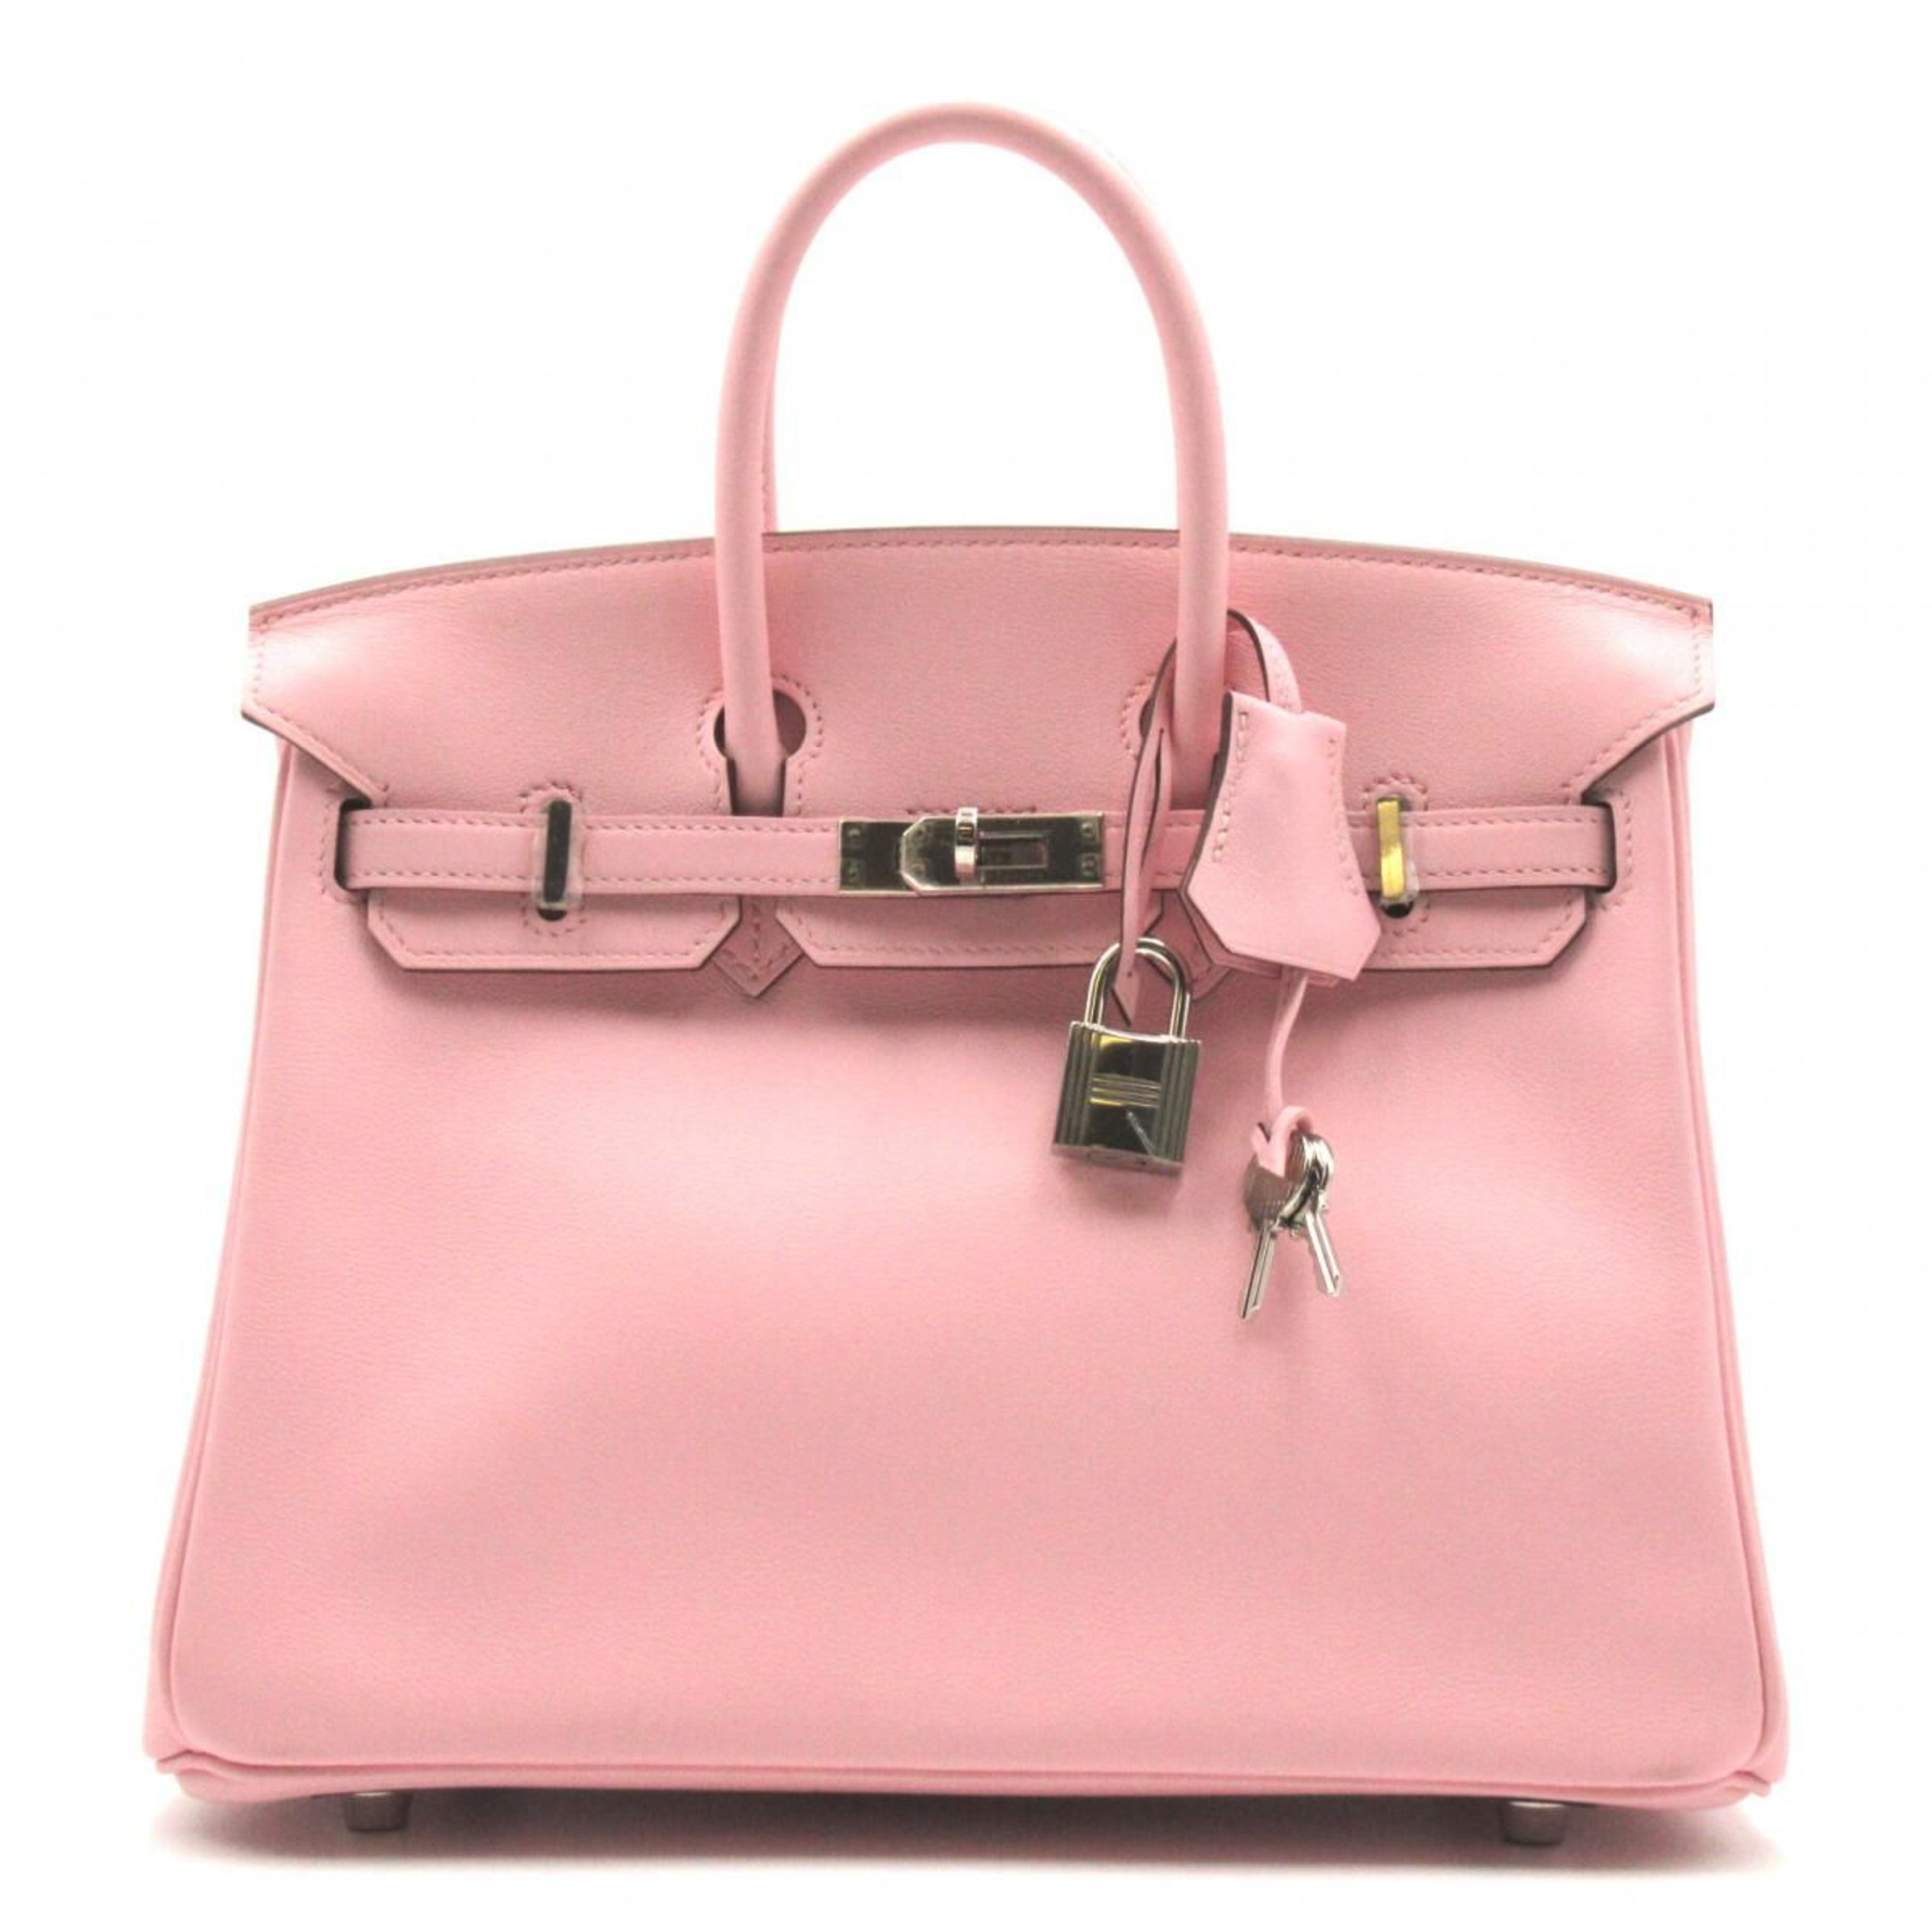 The H Place product - Hermes Kelly 25 Rose Sakura Swift leather